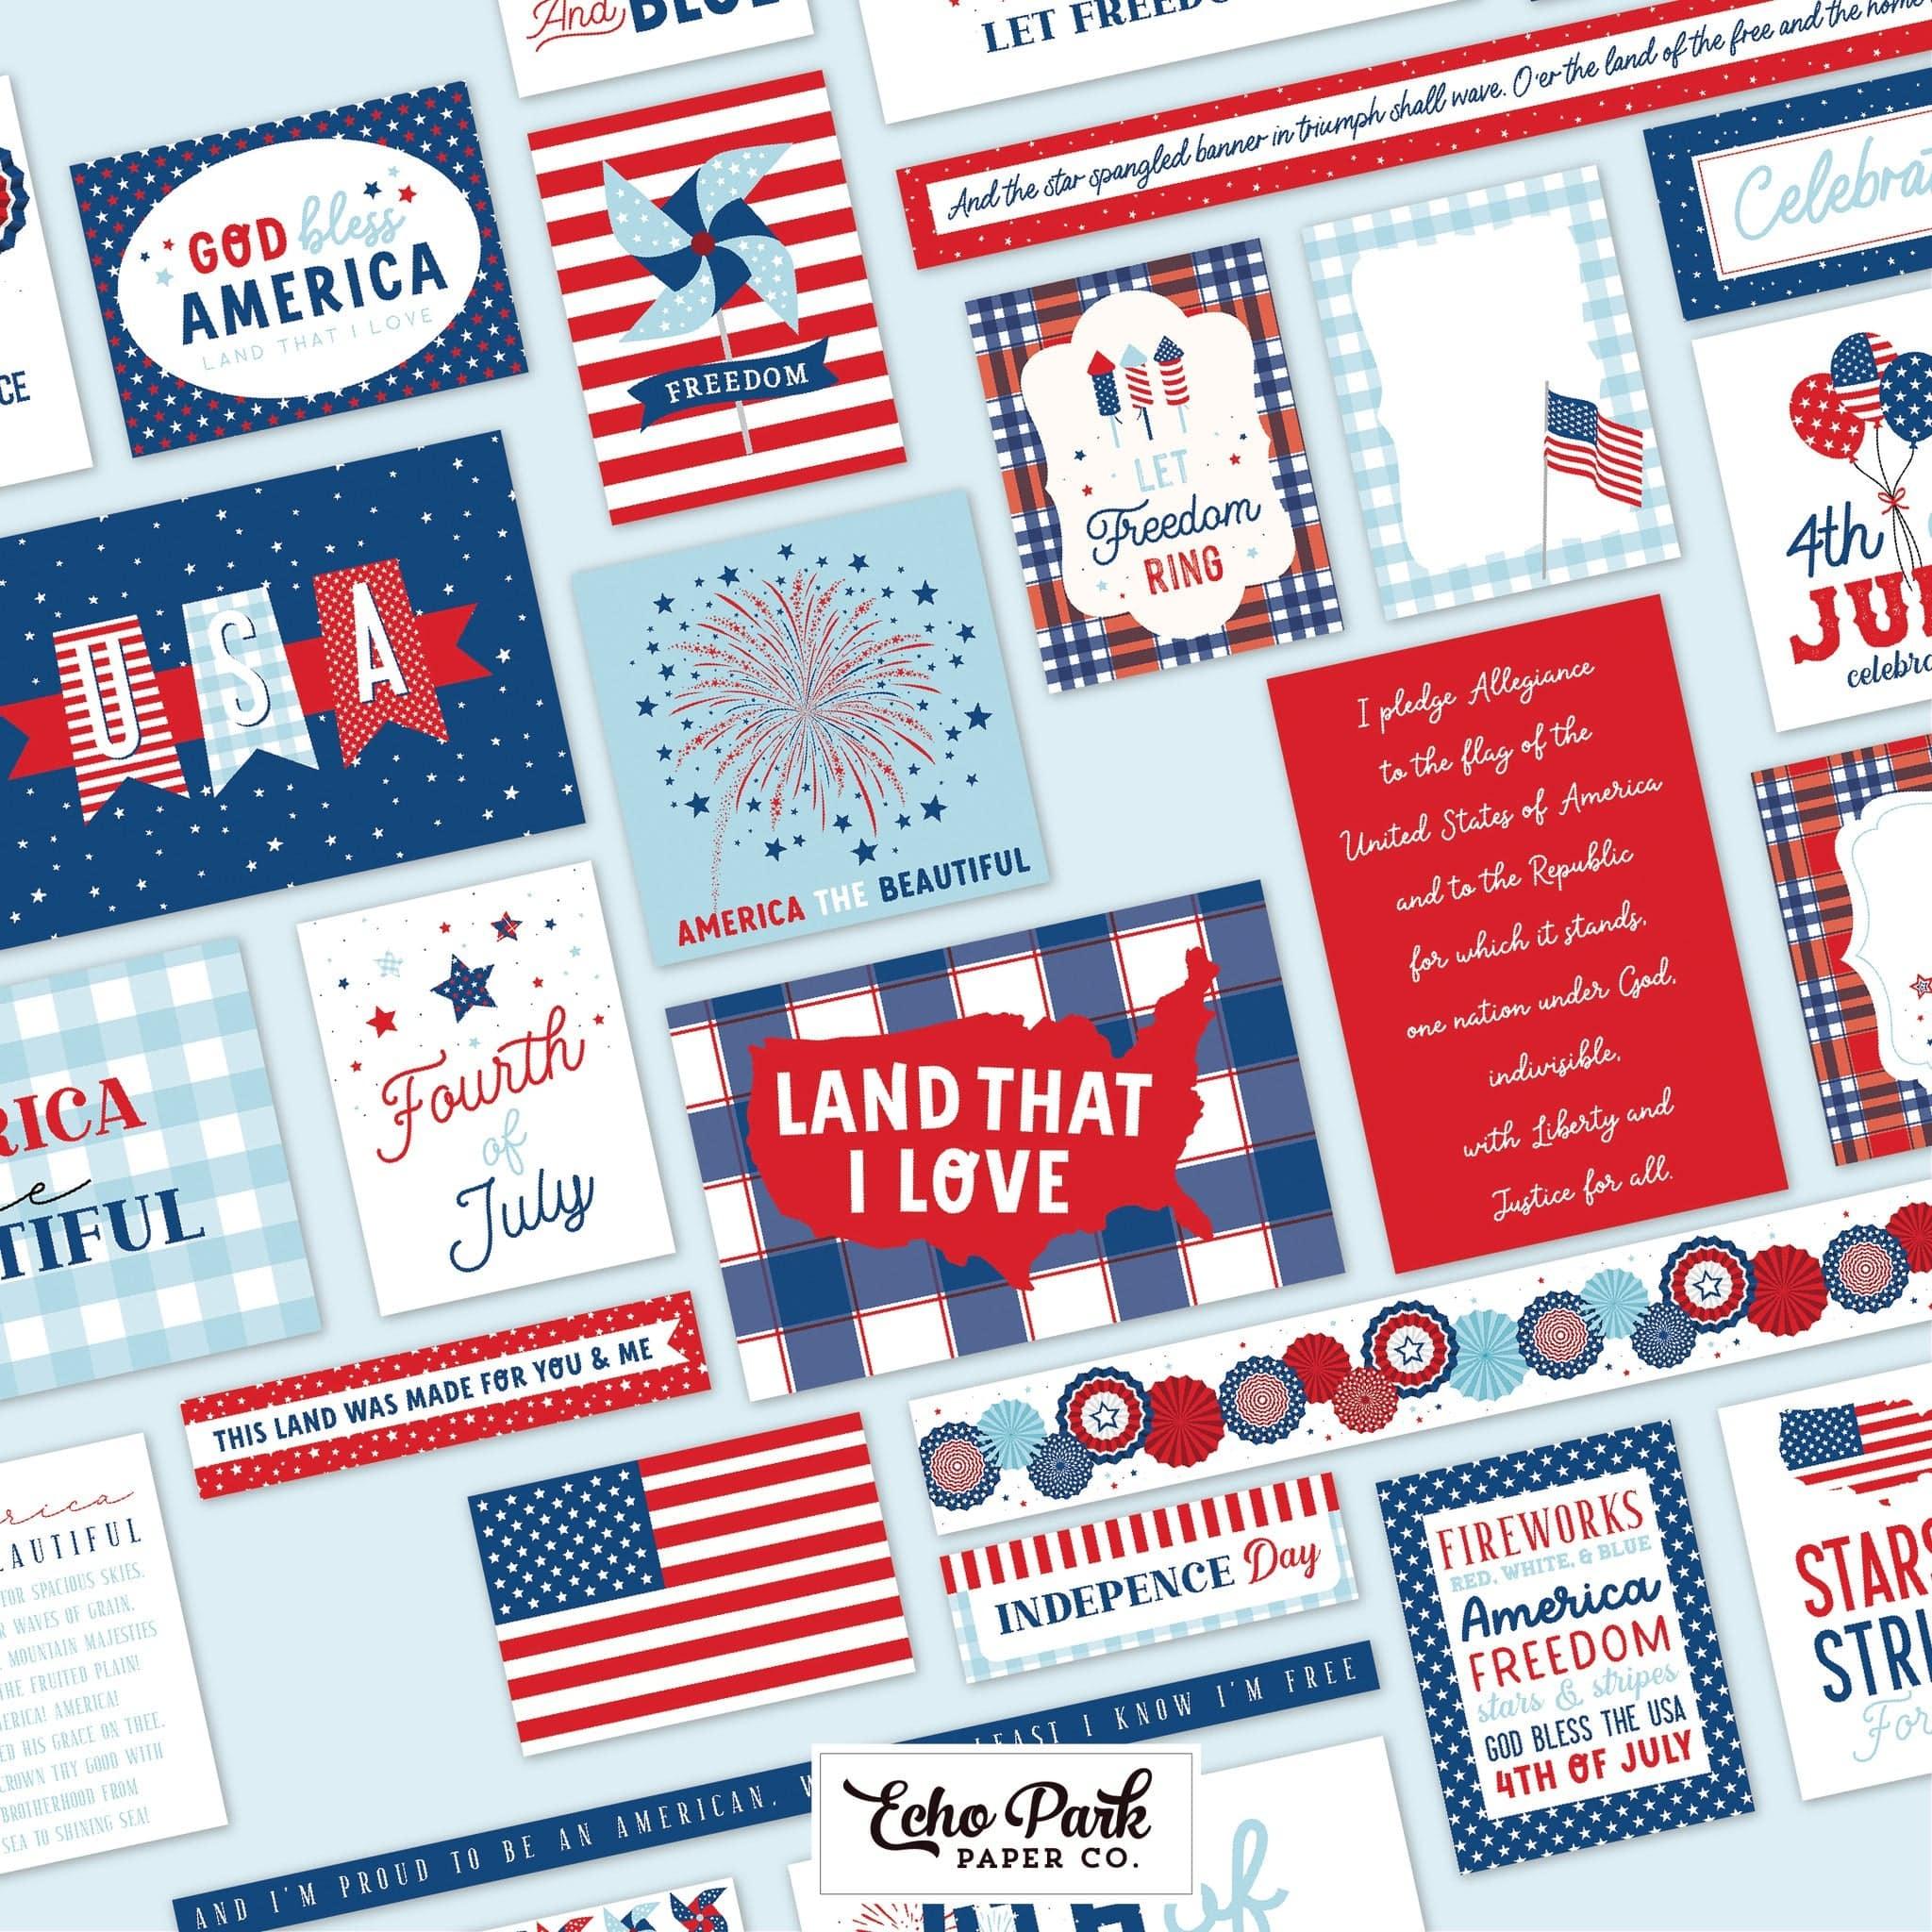 Let Freedom Ring Collection Patriotic Plaid 12 x 12 Double-Sided Scrapbook Paper by Echo Park Paper - Scrapbook Supply Companies